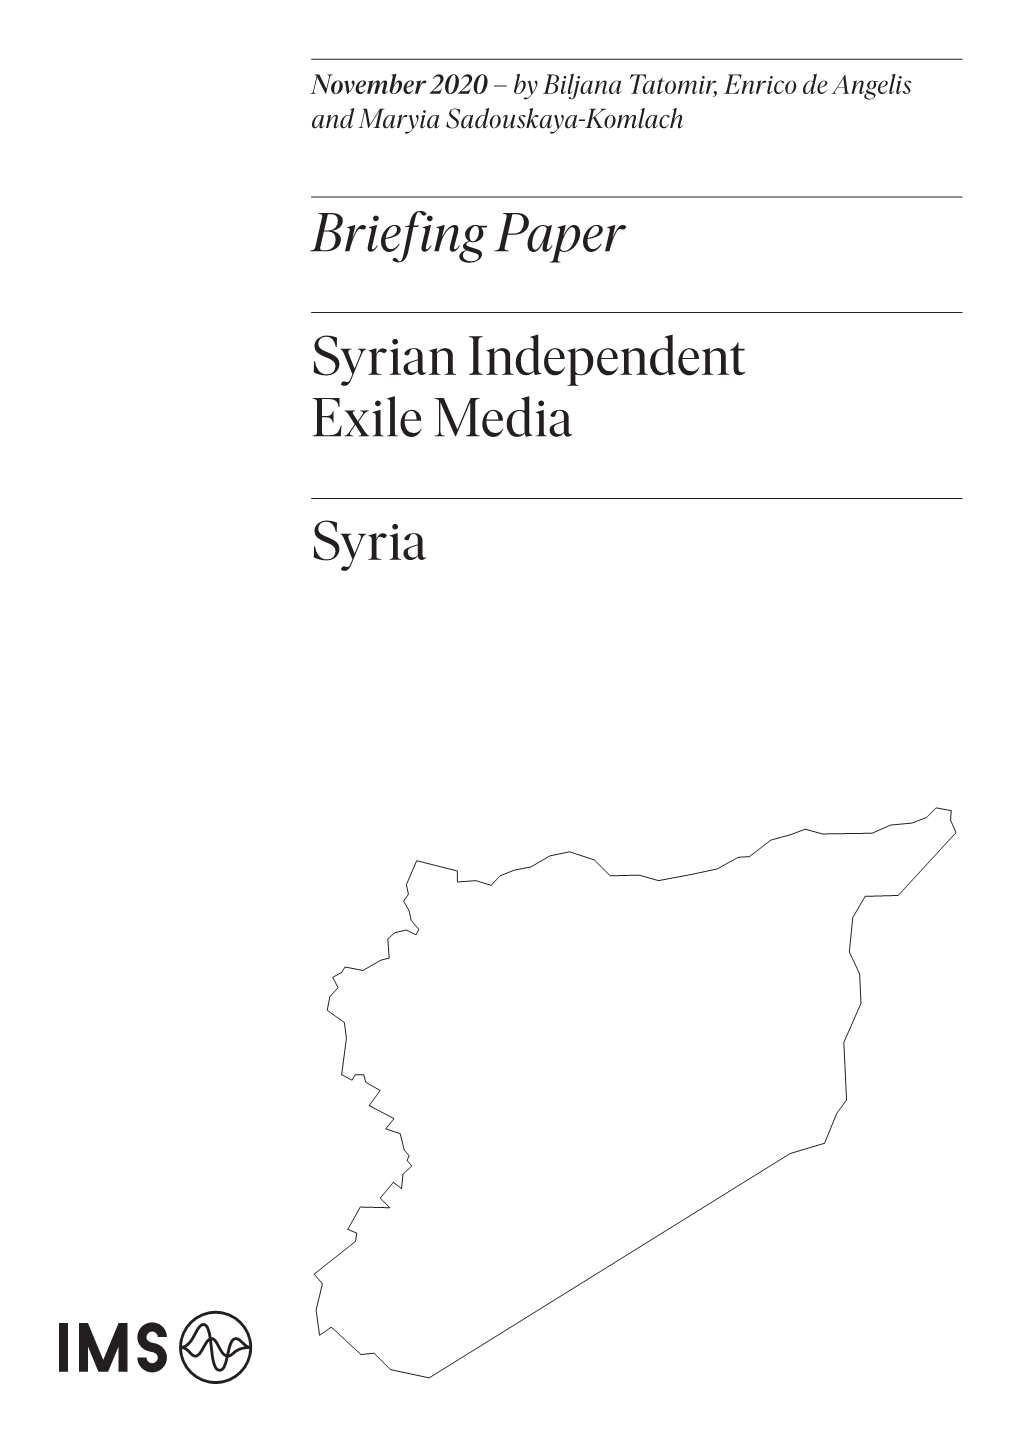 Briefing Paper Syrian Independent Exile